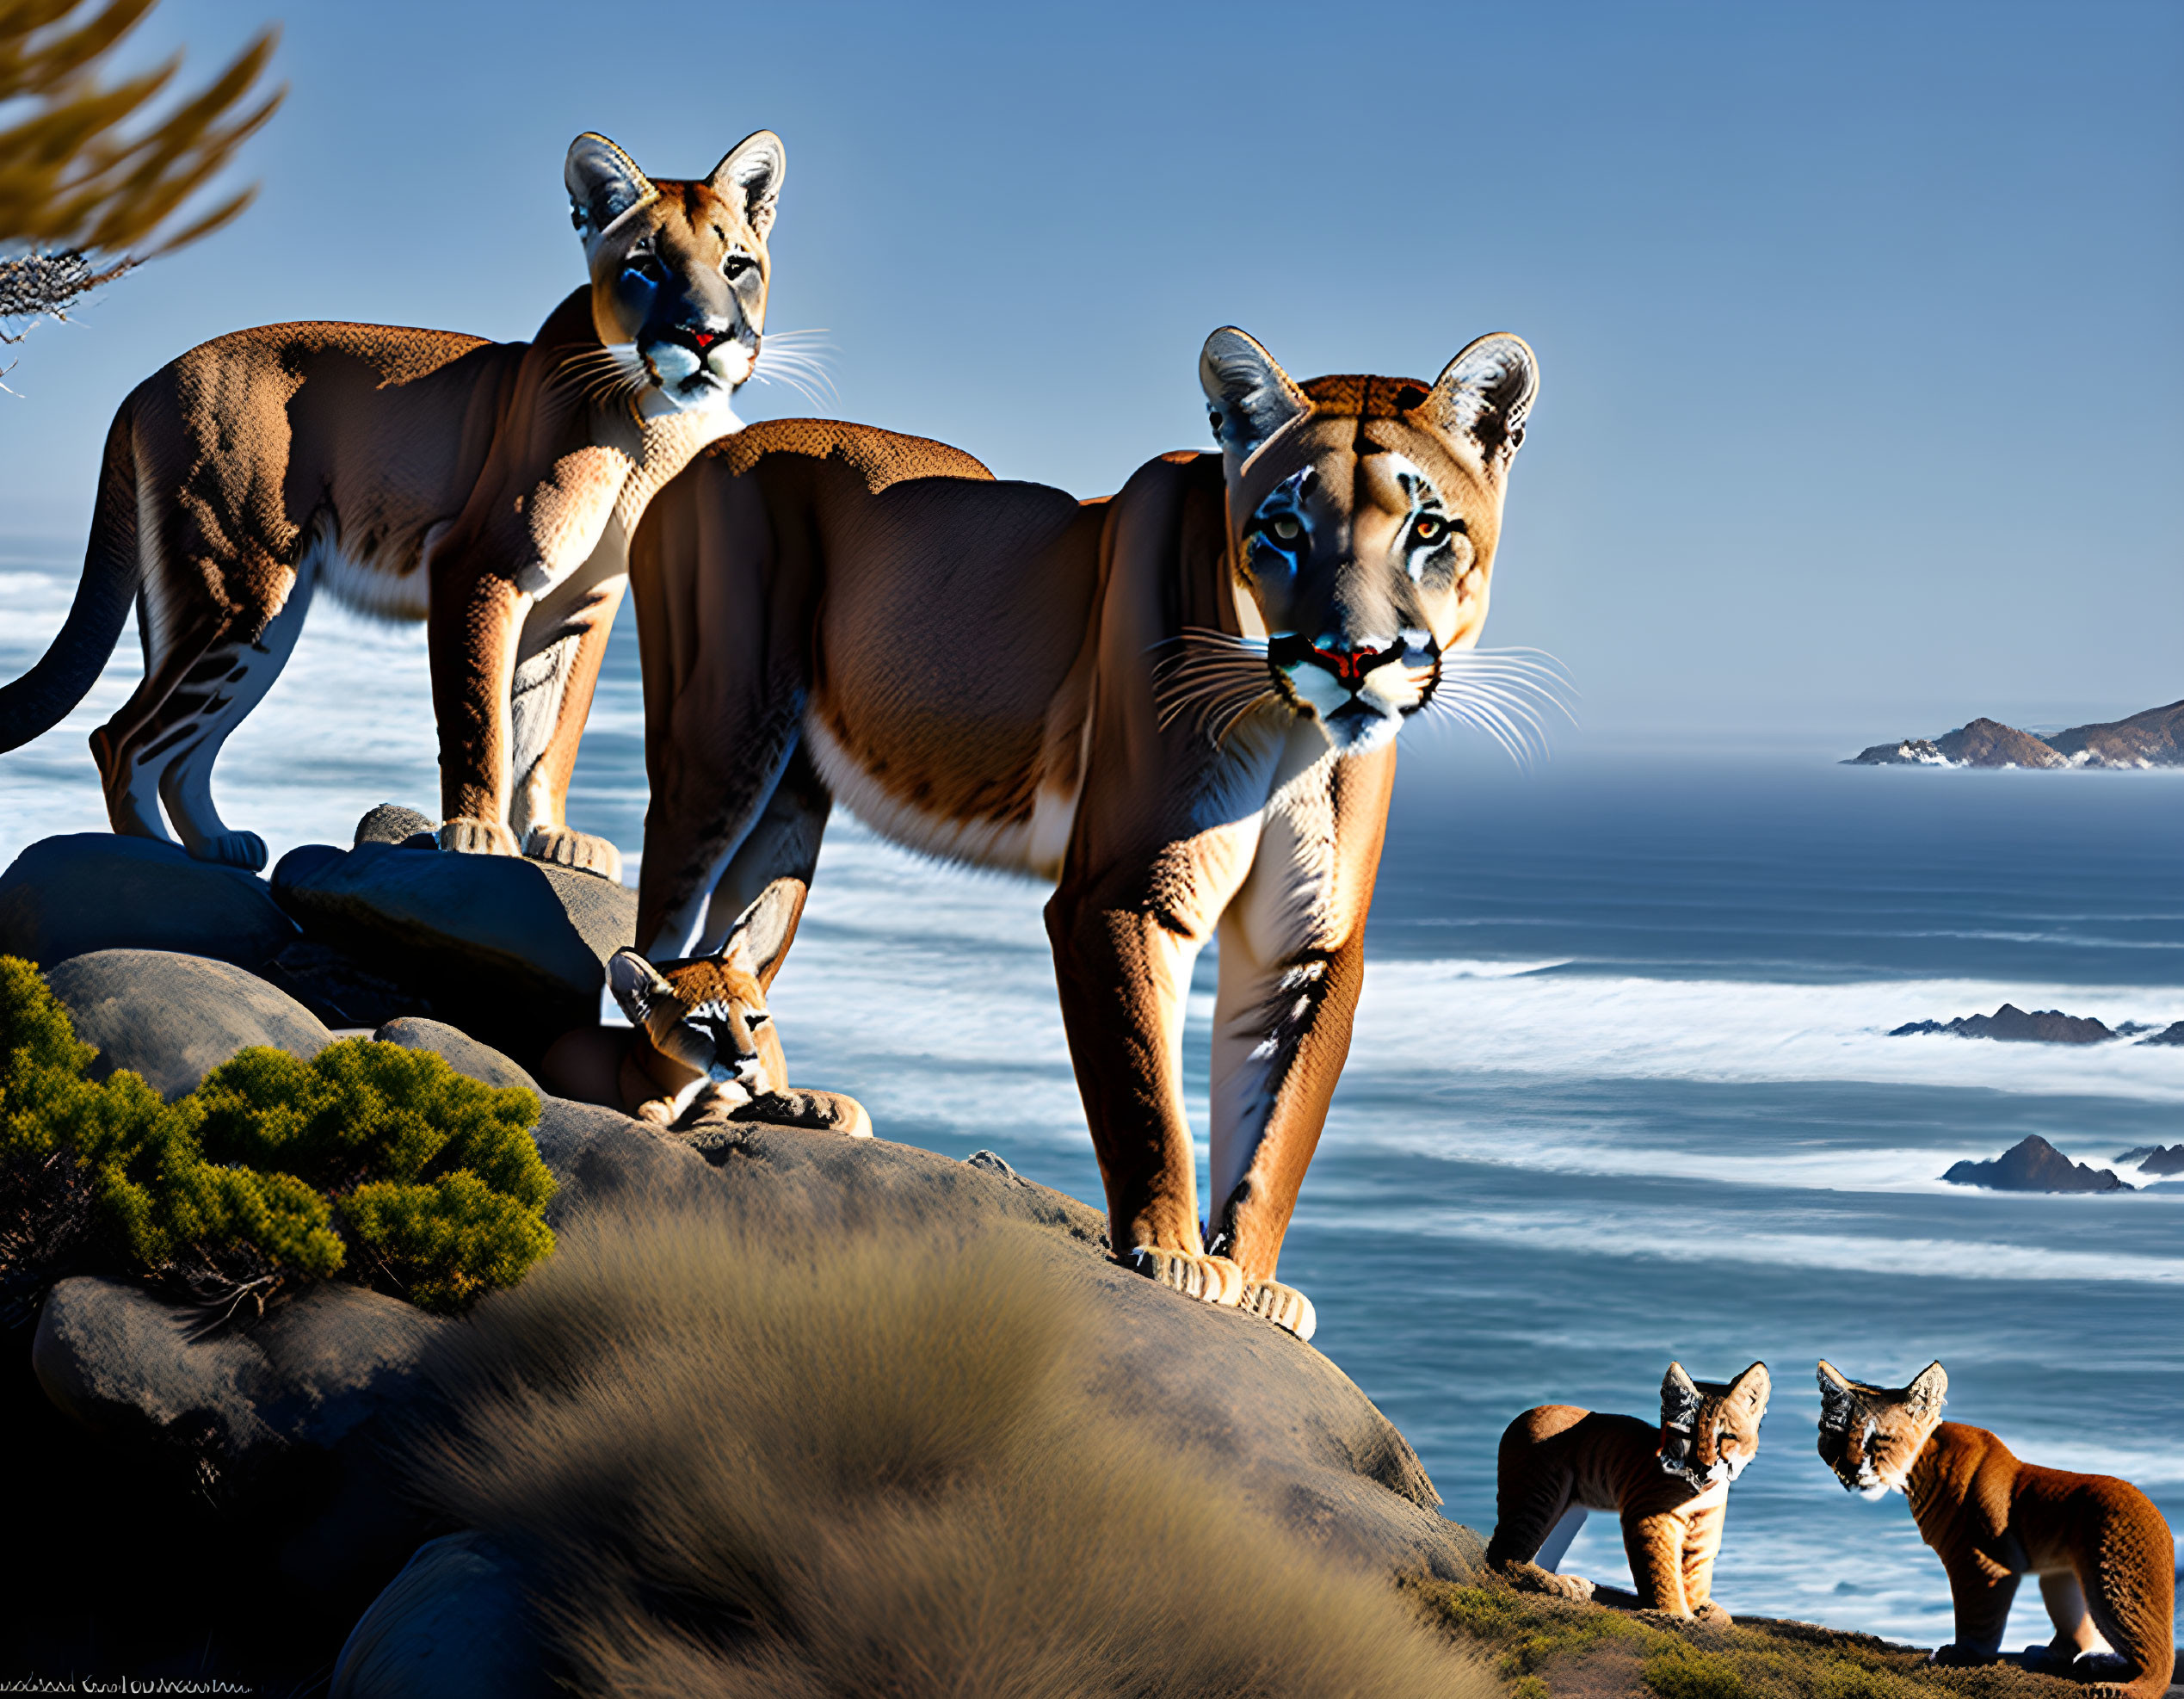 Mountain Lions at the Beach